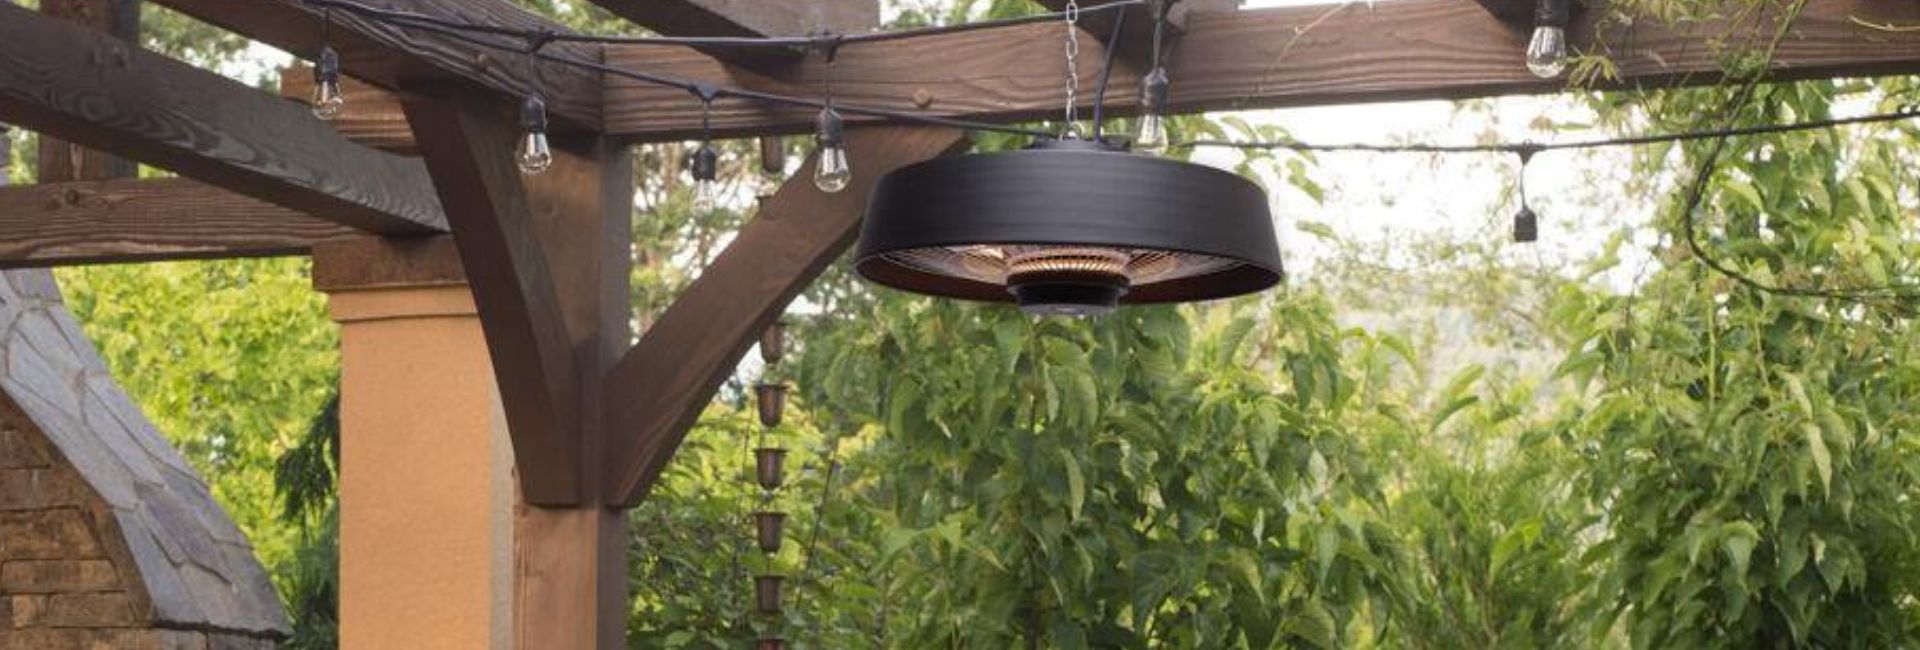 Hanging or Suspended Patio Heater